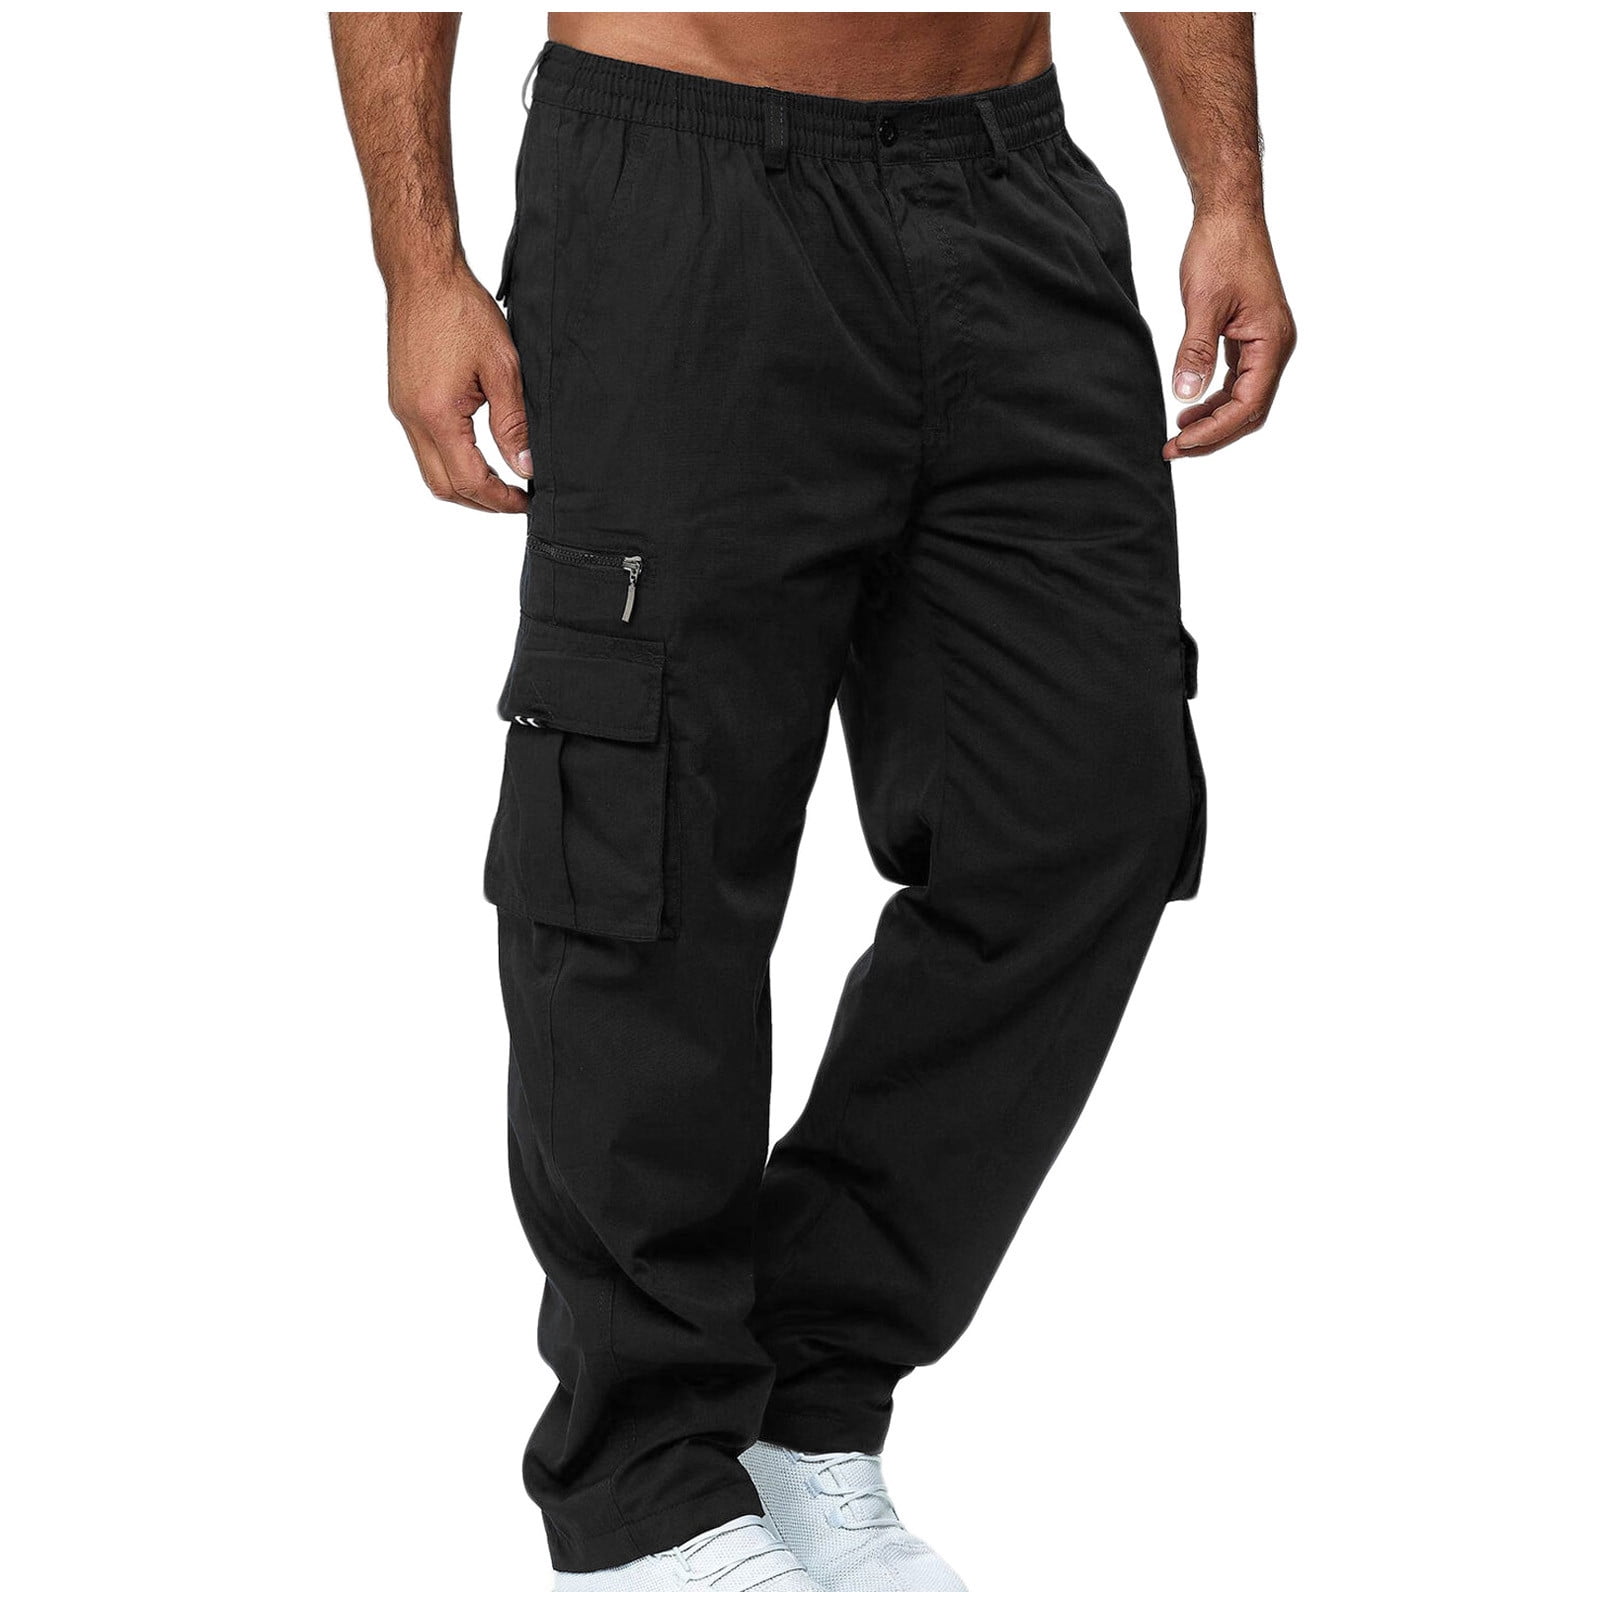 Reduced RQYYD Men's Cargo Pants with Multi-Pockets Cotton Sweatpants Casual  Athletic Jogger Work Sports Outdoor Trousers(Black,3XL)